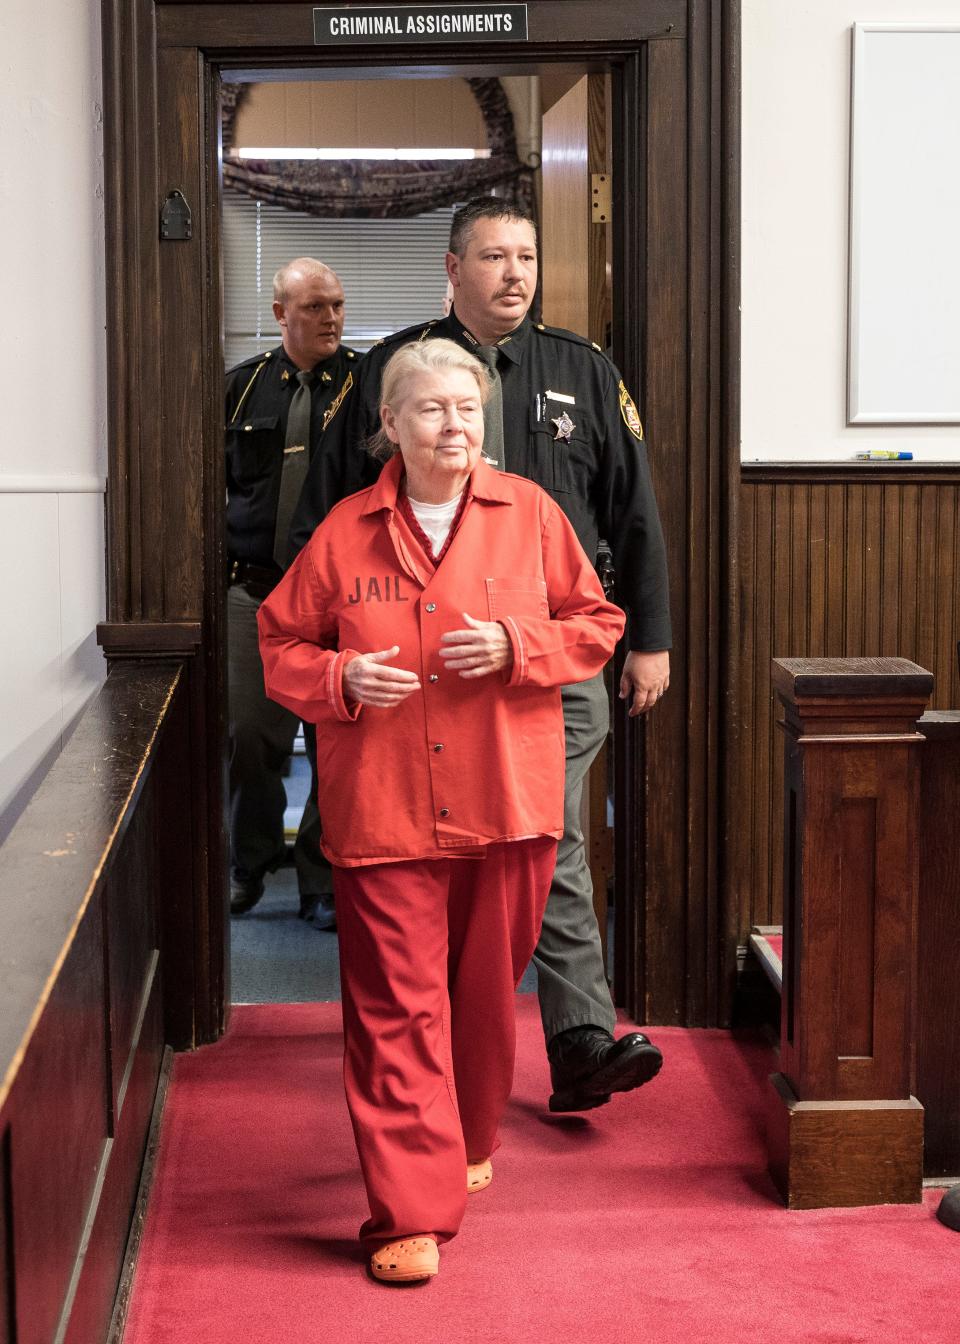 Wagner family matriarch Fredericka Wagner enters the Pike County Courthouse in November 2018 when arraigned on one count of obstructing justice and one count of perjury, related to her purchase of two bullet-proof vests. Prosecutors dropped the charges in June 2019.